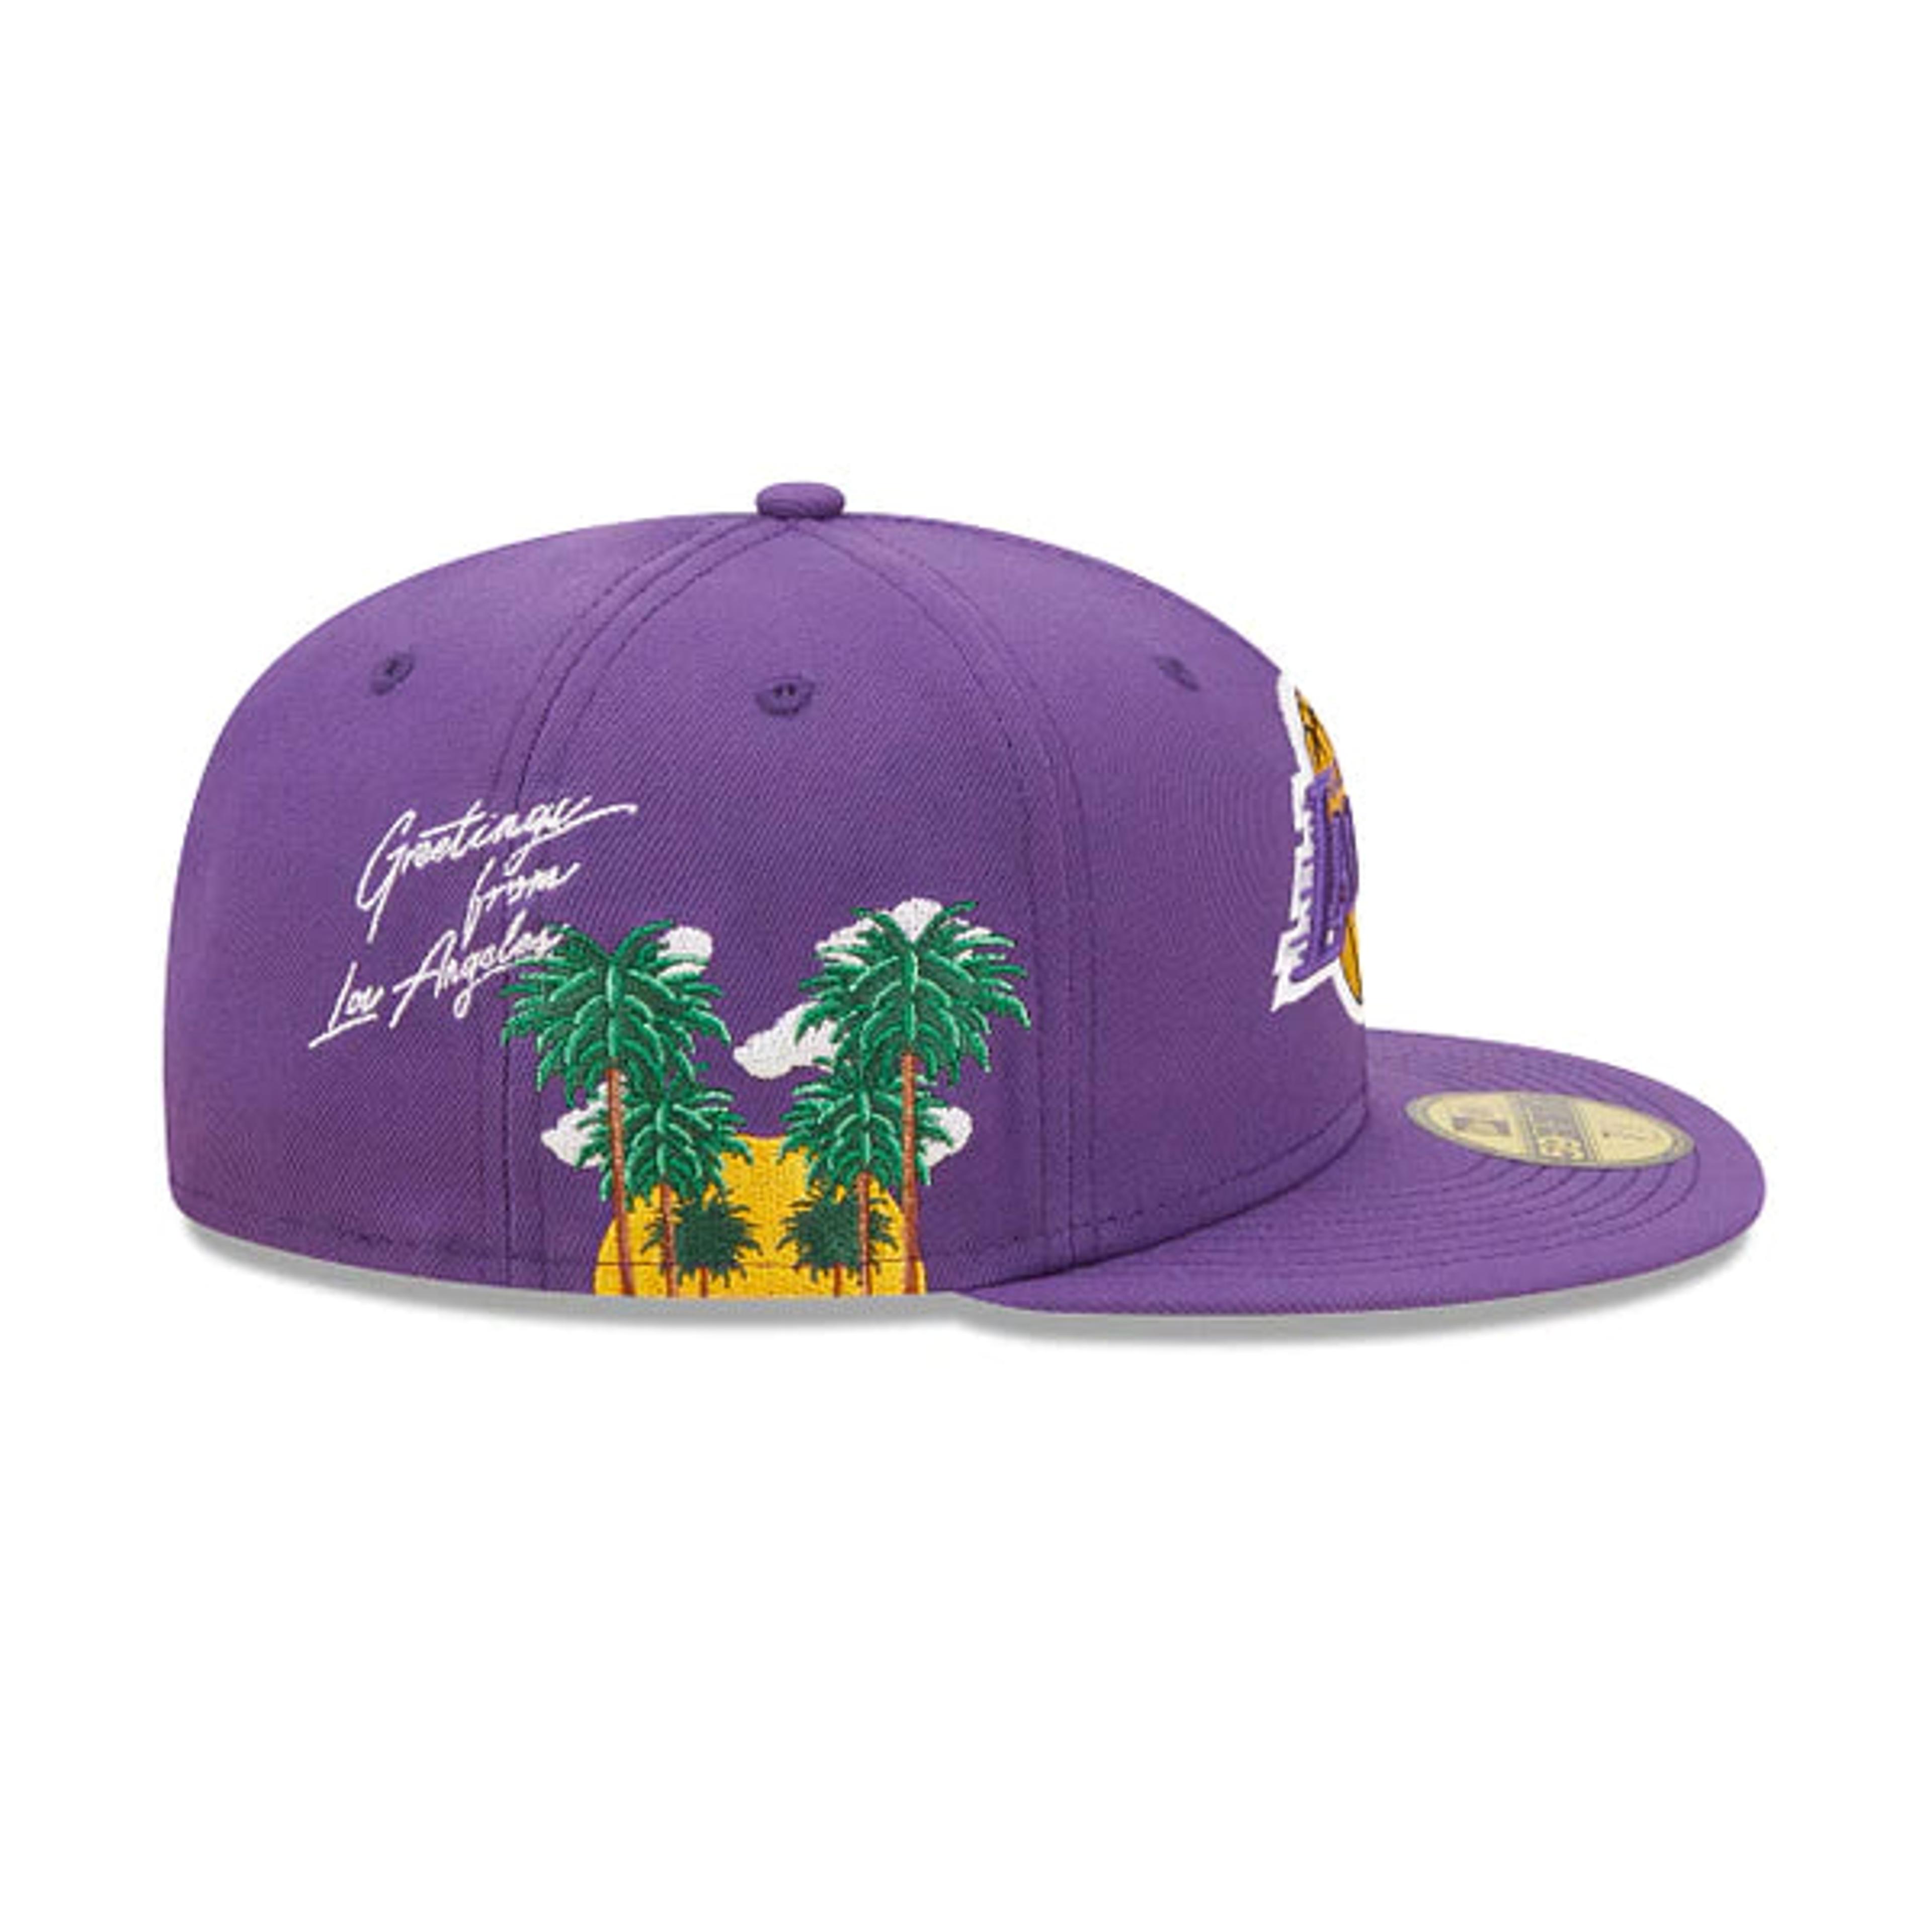 Alternate View 1 of New Era Los Angeles Lakers 'Cloud Icon' 5950 Fitted